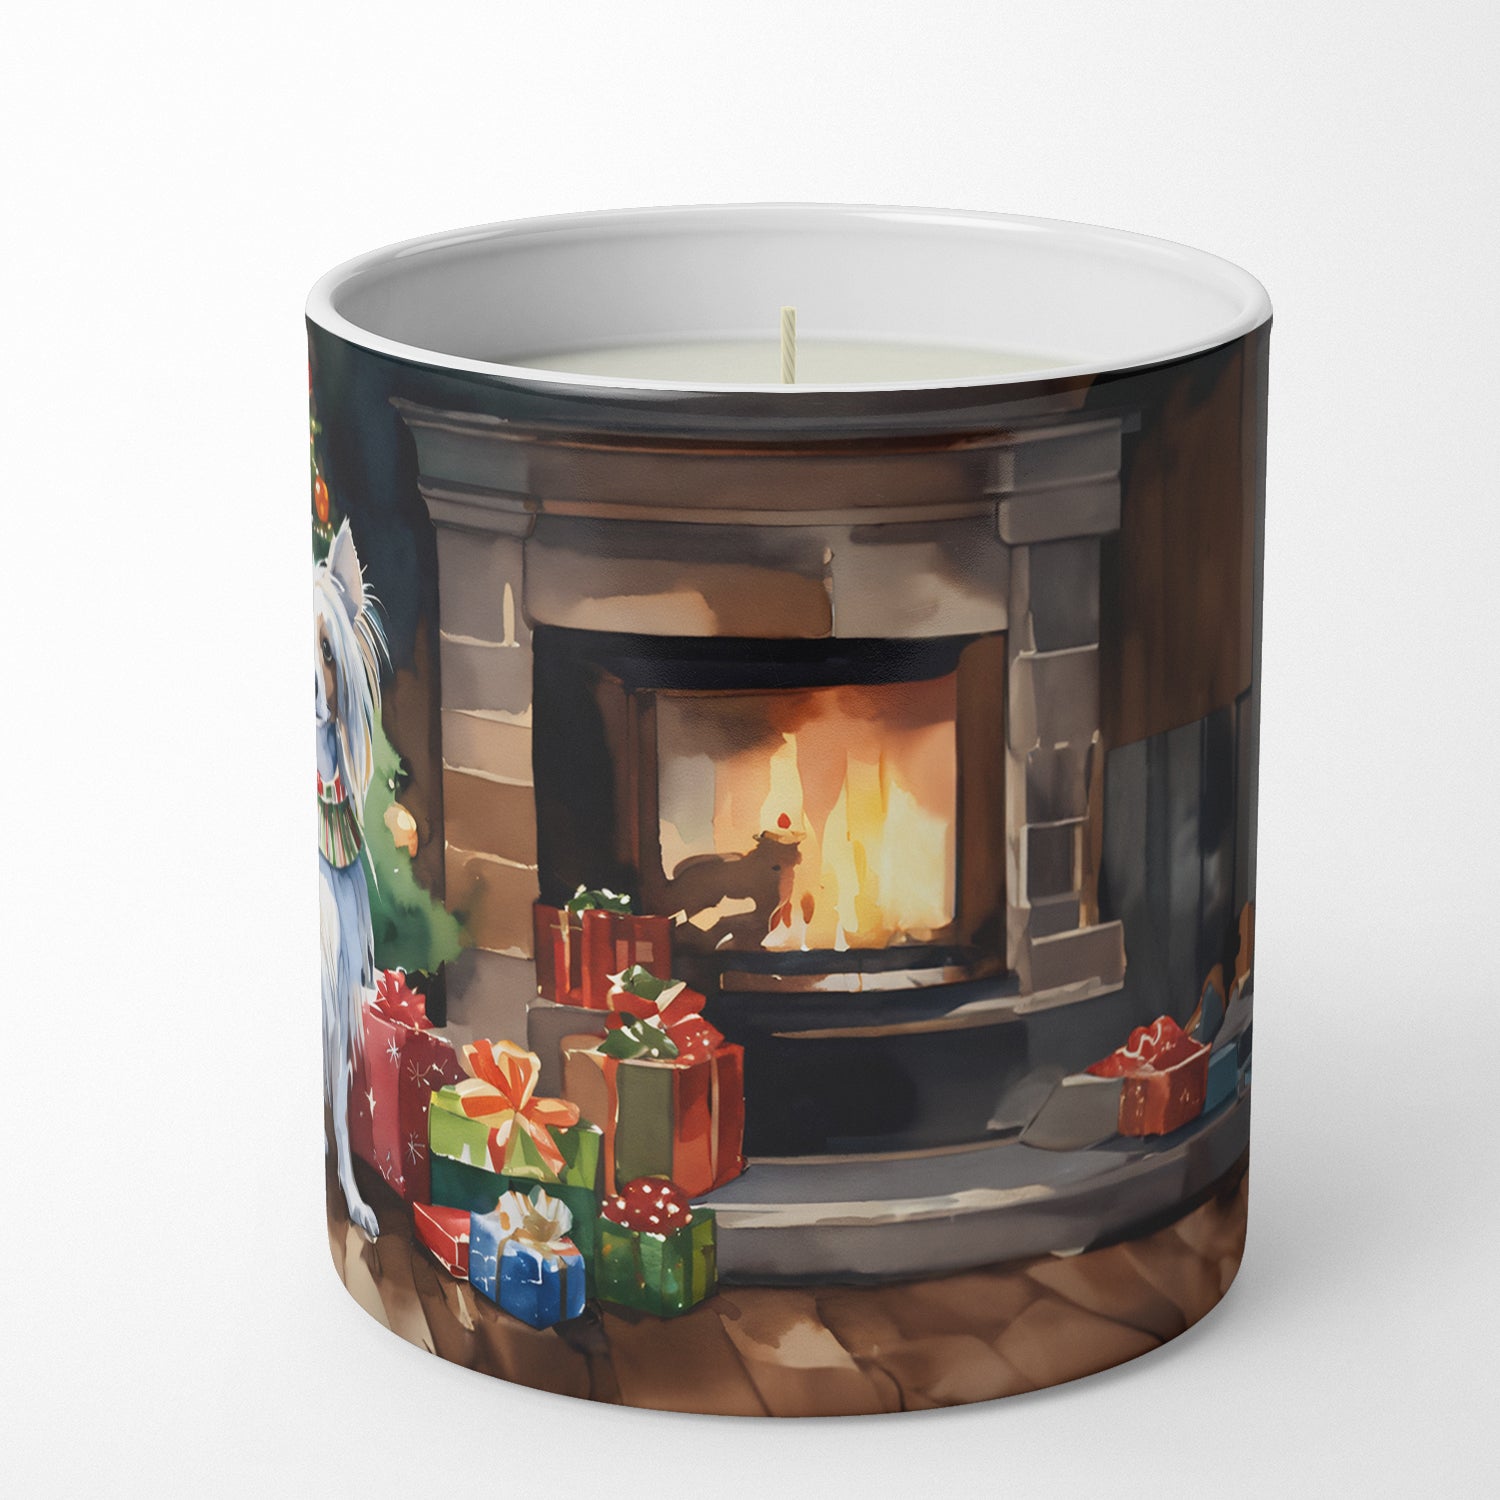 Chinese Crested Cozy Christmas Decorative Soy Candle